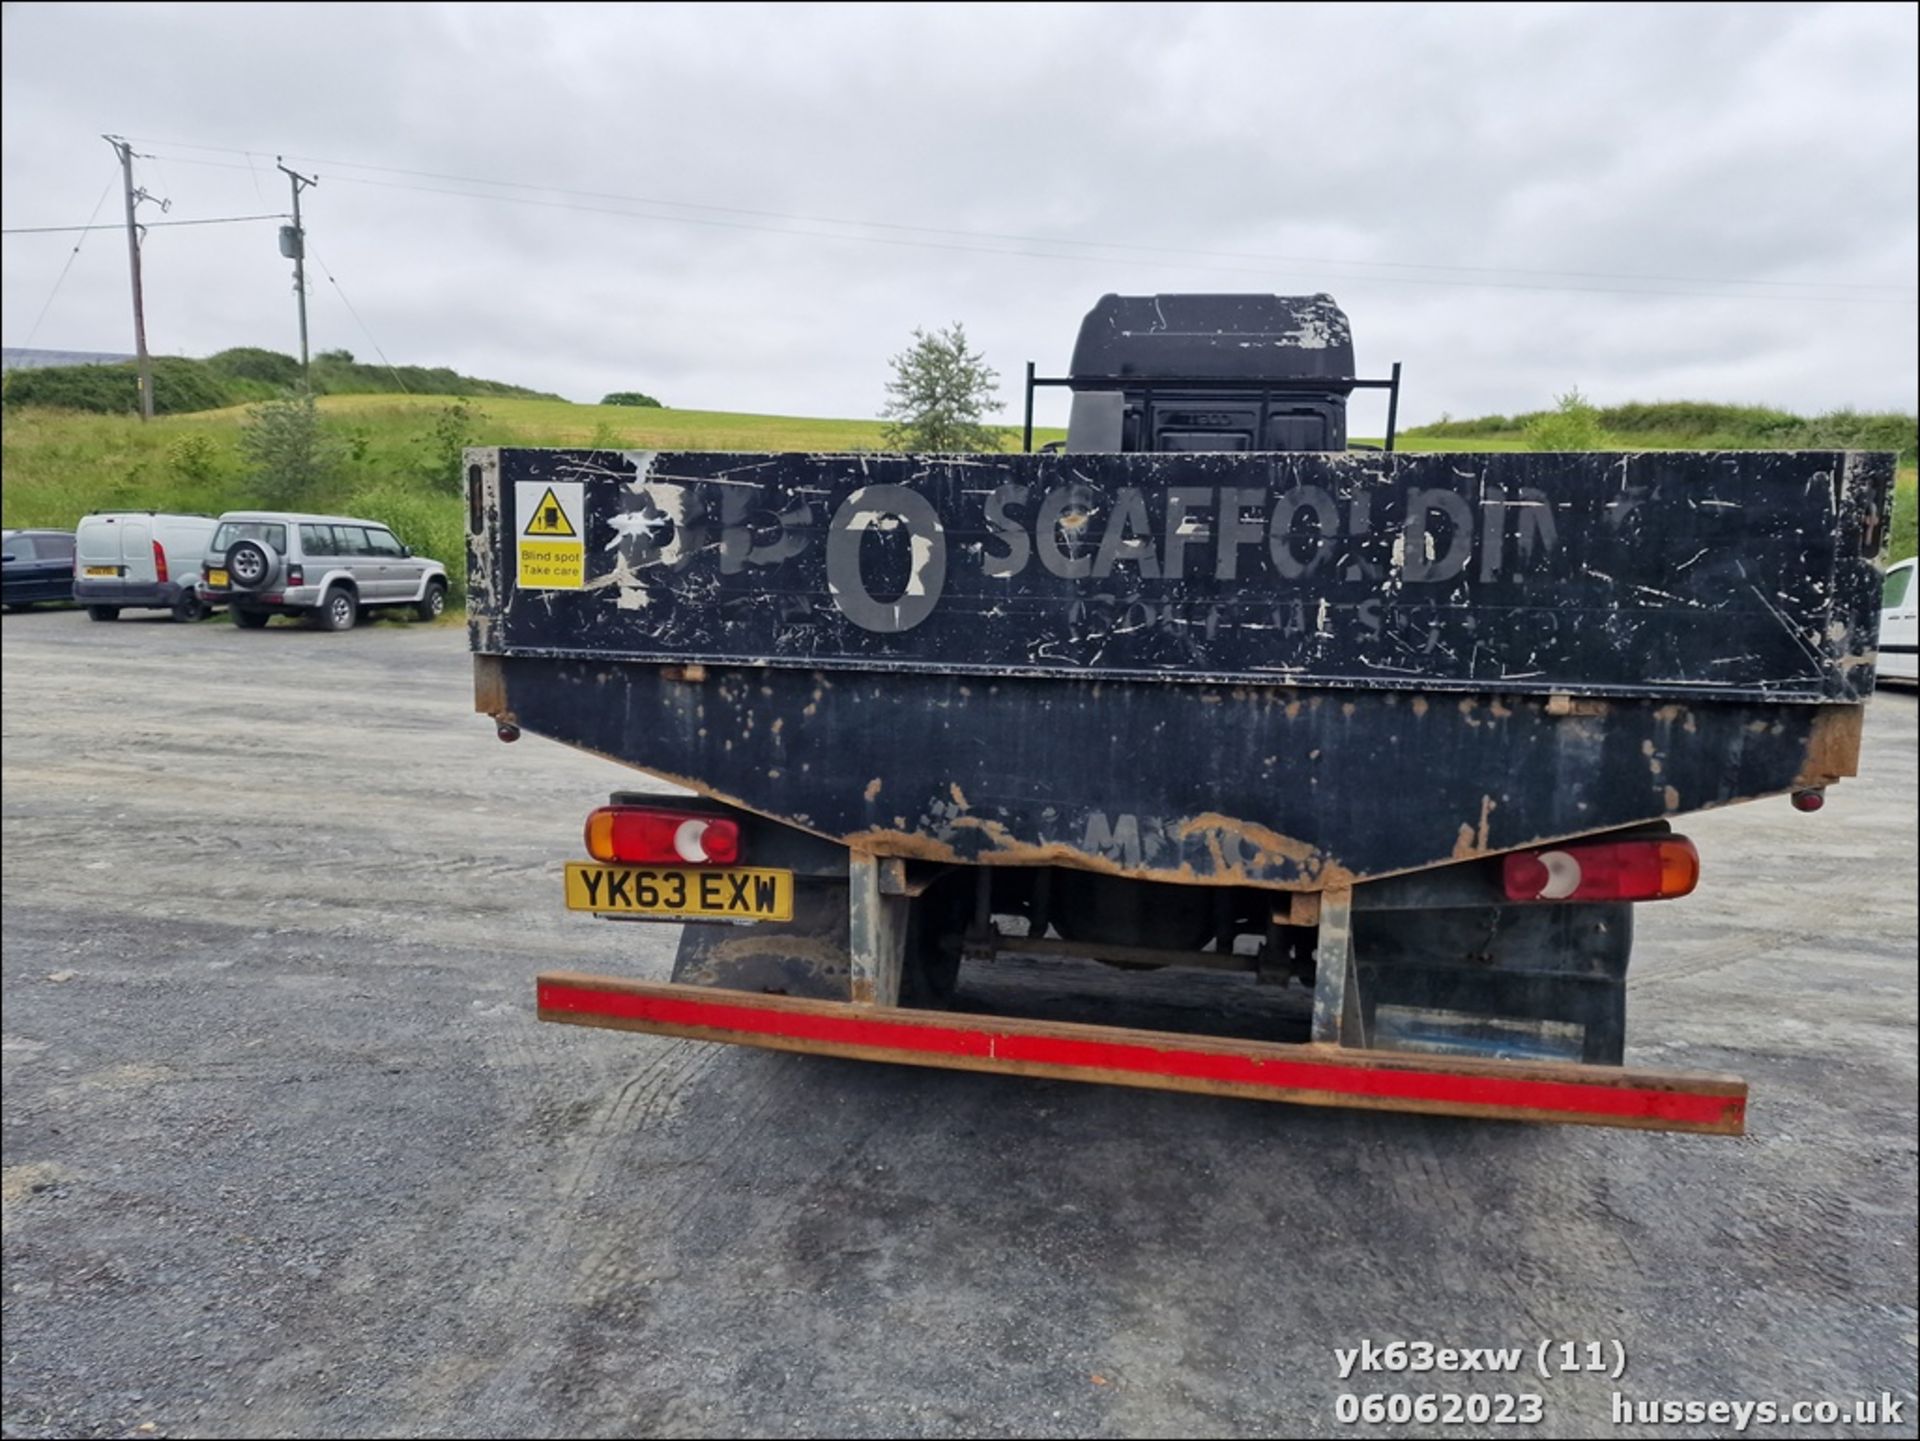 13/63 IVECO EUROCARGO (MY 2008) - 5880cc 2dr Flat Bed (Black) - Image 11 of 21